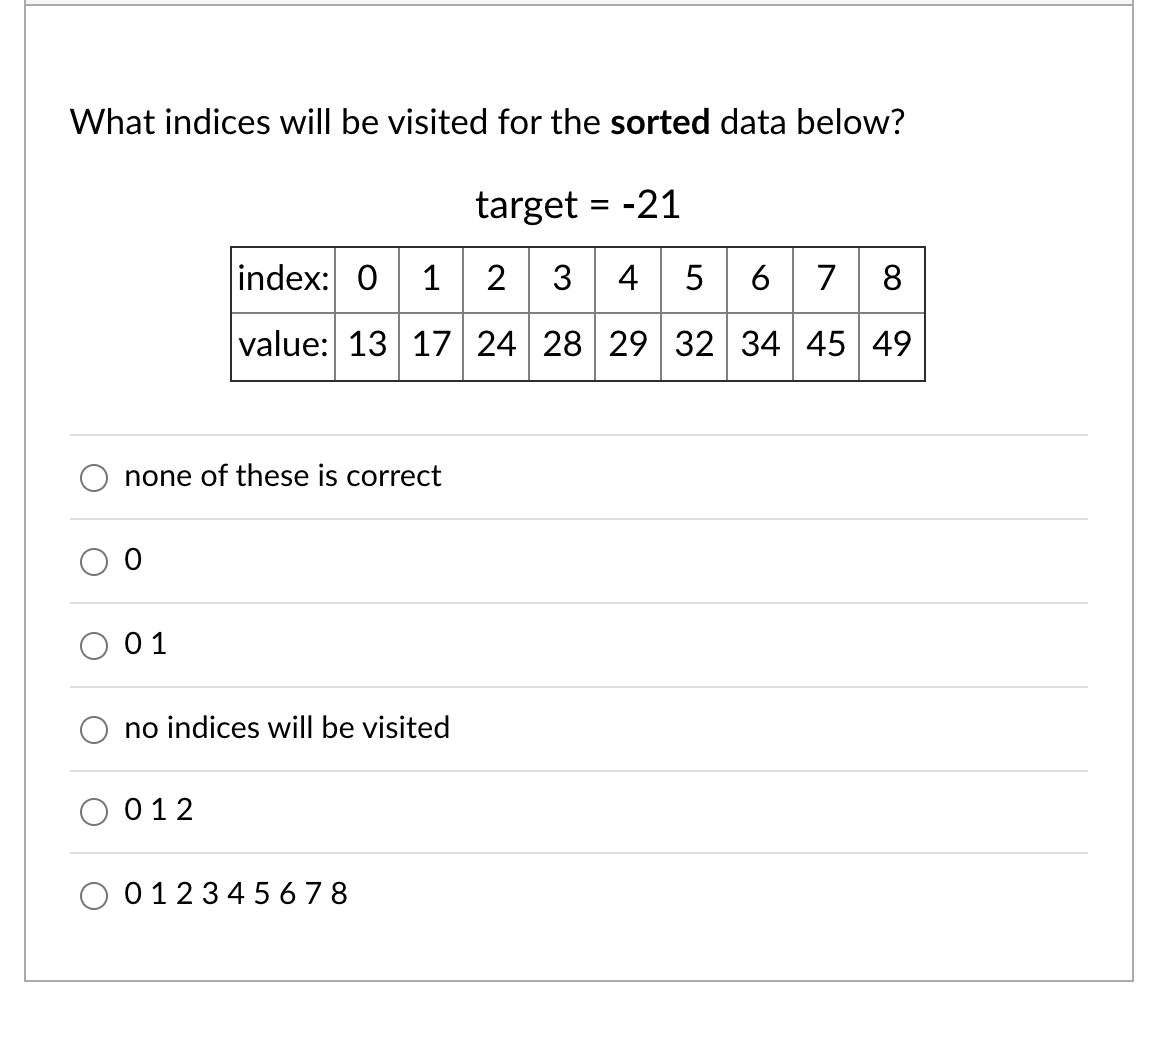 What indices will be visited for the sorted data below?
target = -21
%D
0 1 2
3 4 5
6 7
index:
8
value: 13 17 24 28 29 32 34 45 49
none of these is correct
0 1
no indices will be visited
012
O 01234 5 67 8
